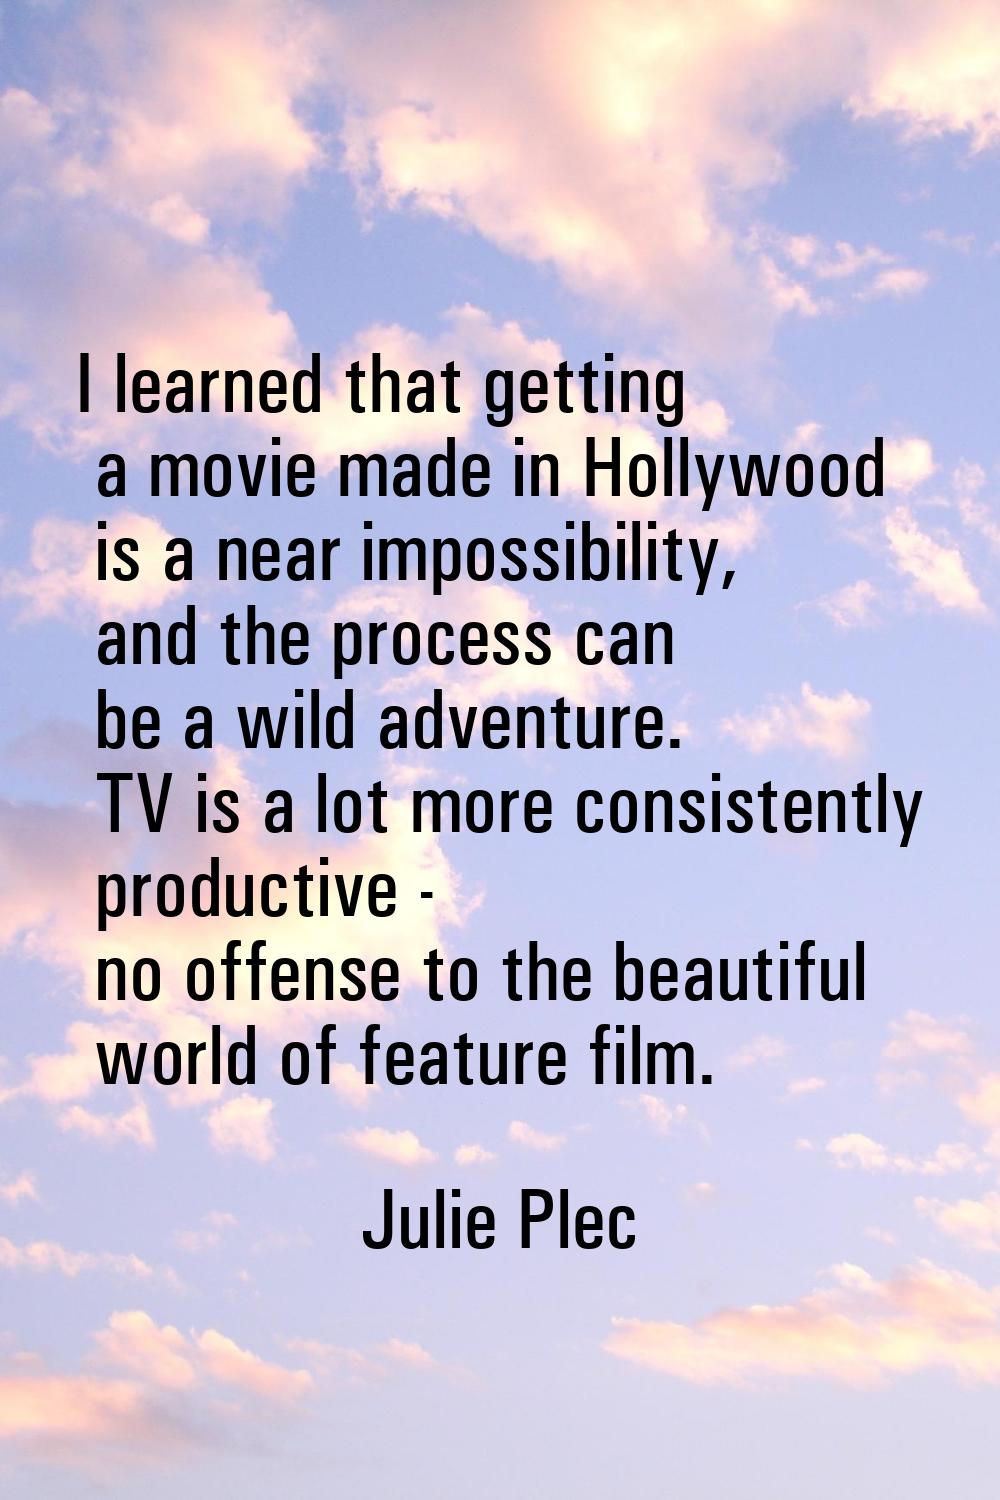 I learned that getting a movie made in Hollywood is a near impossibility, and the process can be a 